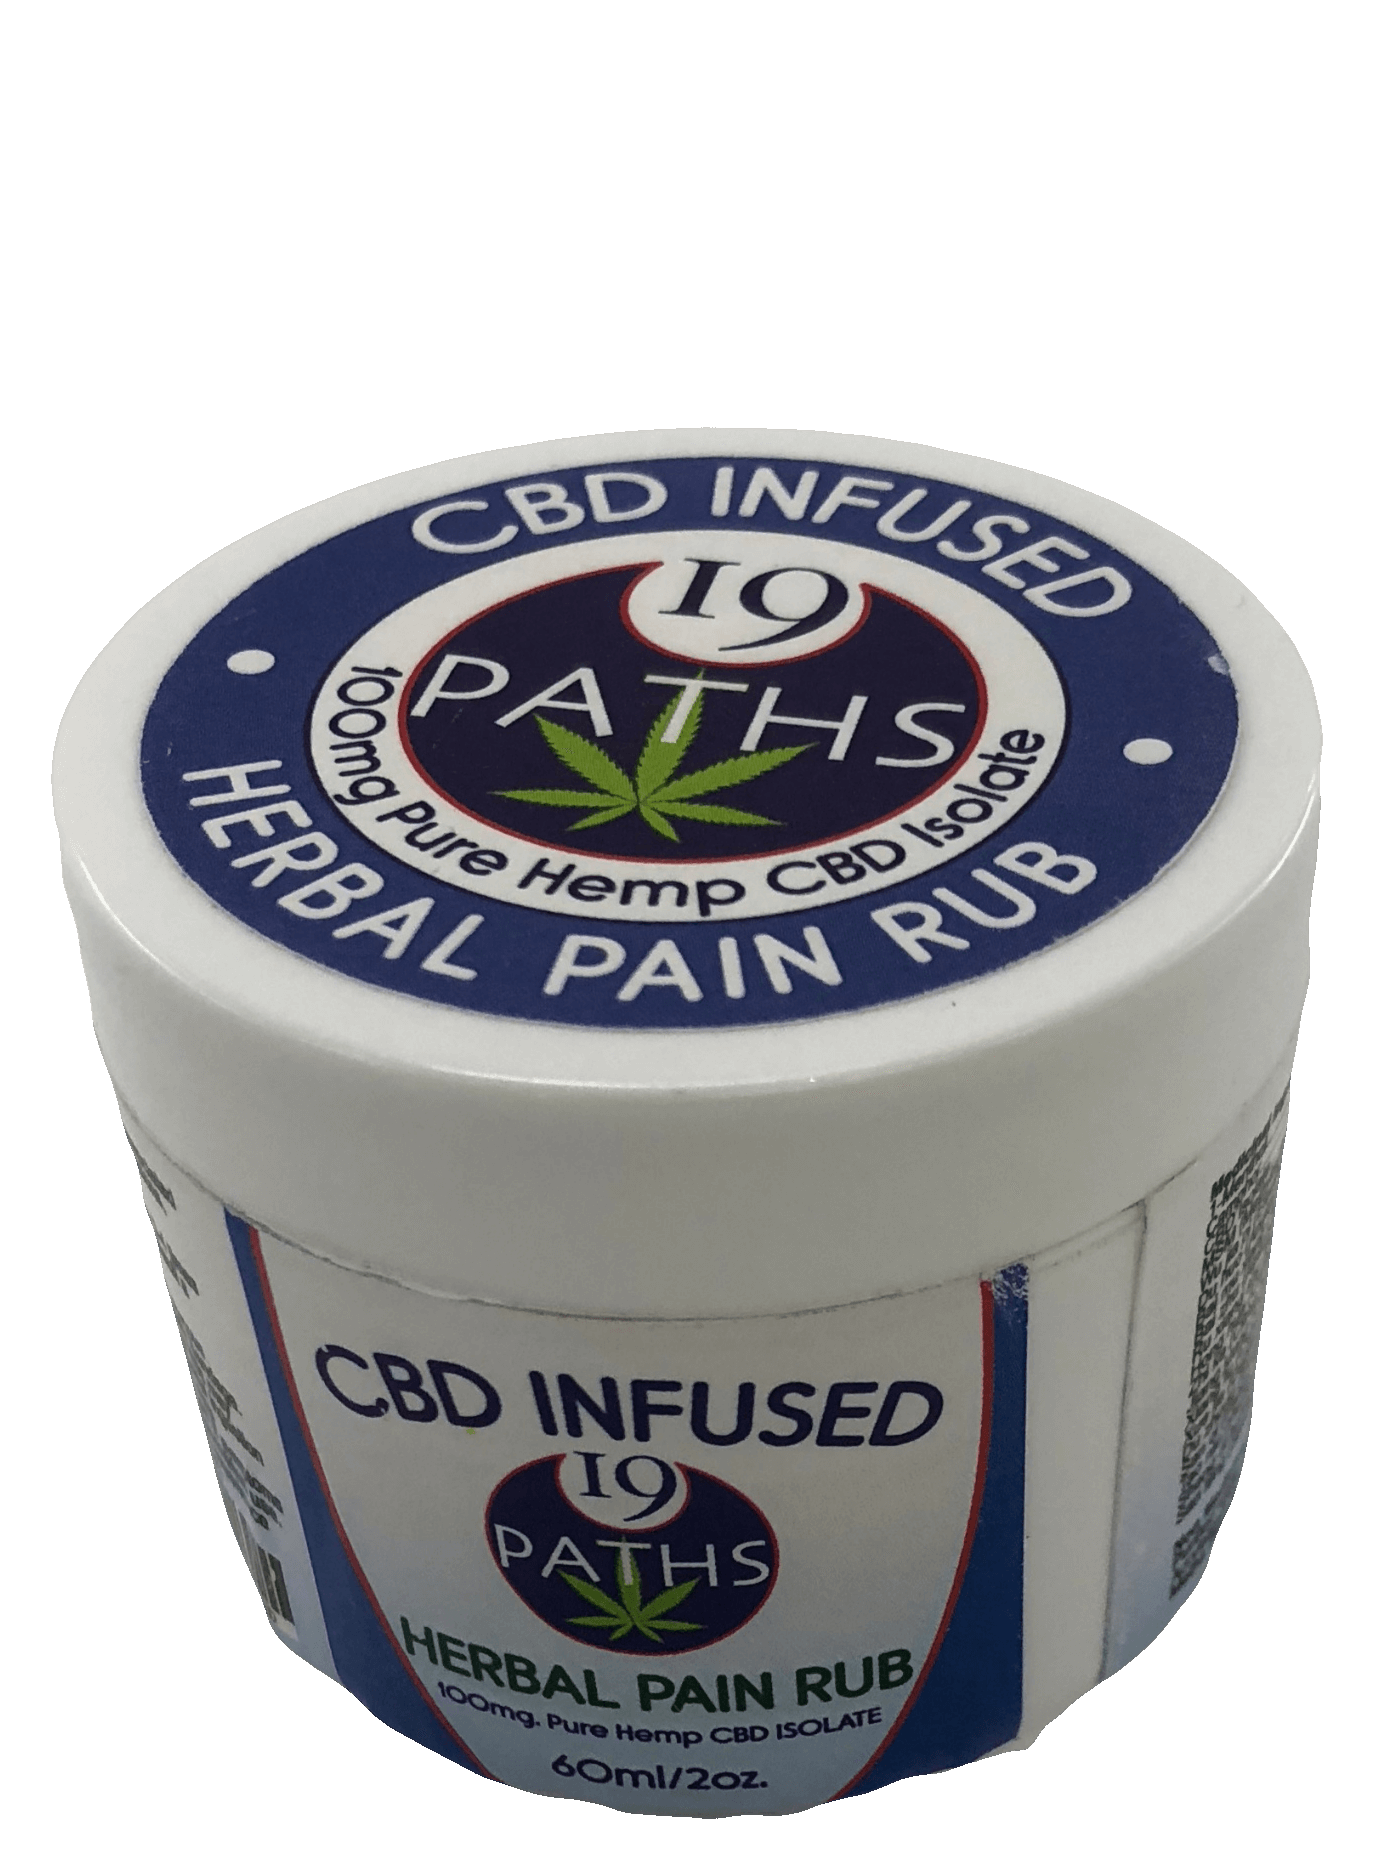 topicals-19-paths-cbd-infused-pain-rub-100mg